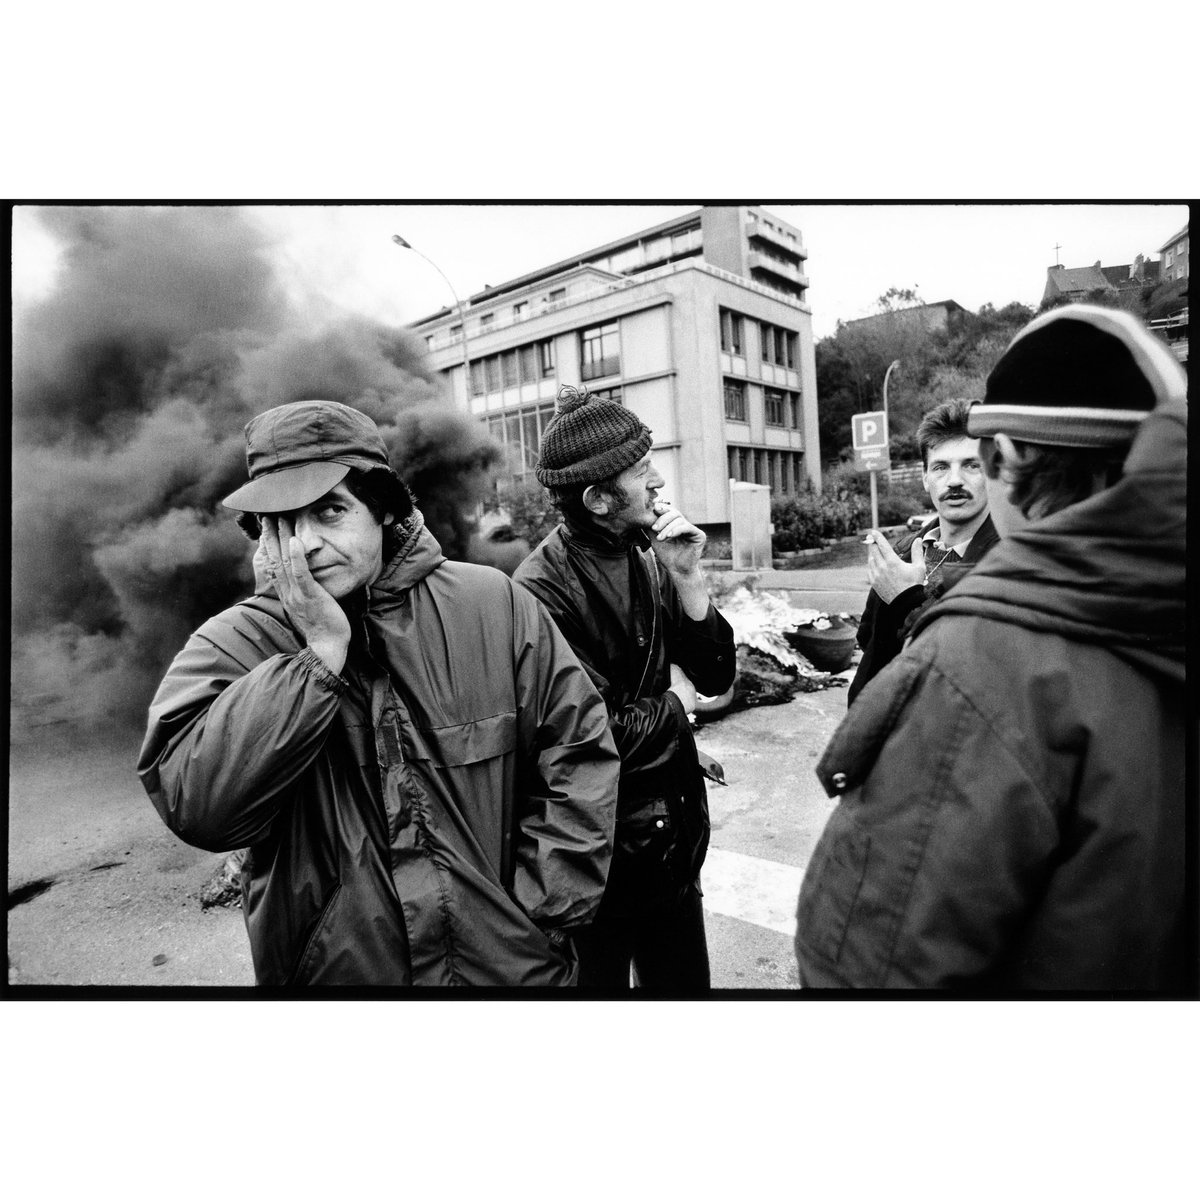 At a picket line in Boulogne, France. @StreetPhotoInt @BWPMag #filmphotography #darkroom #France